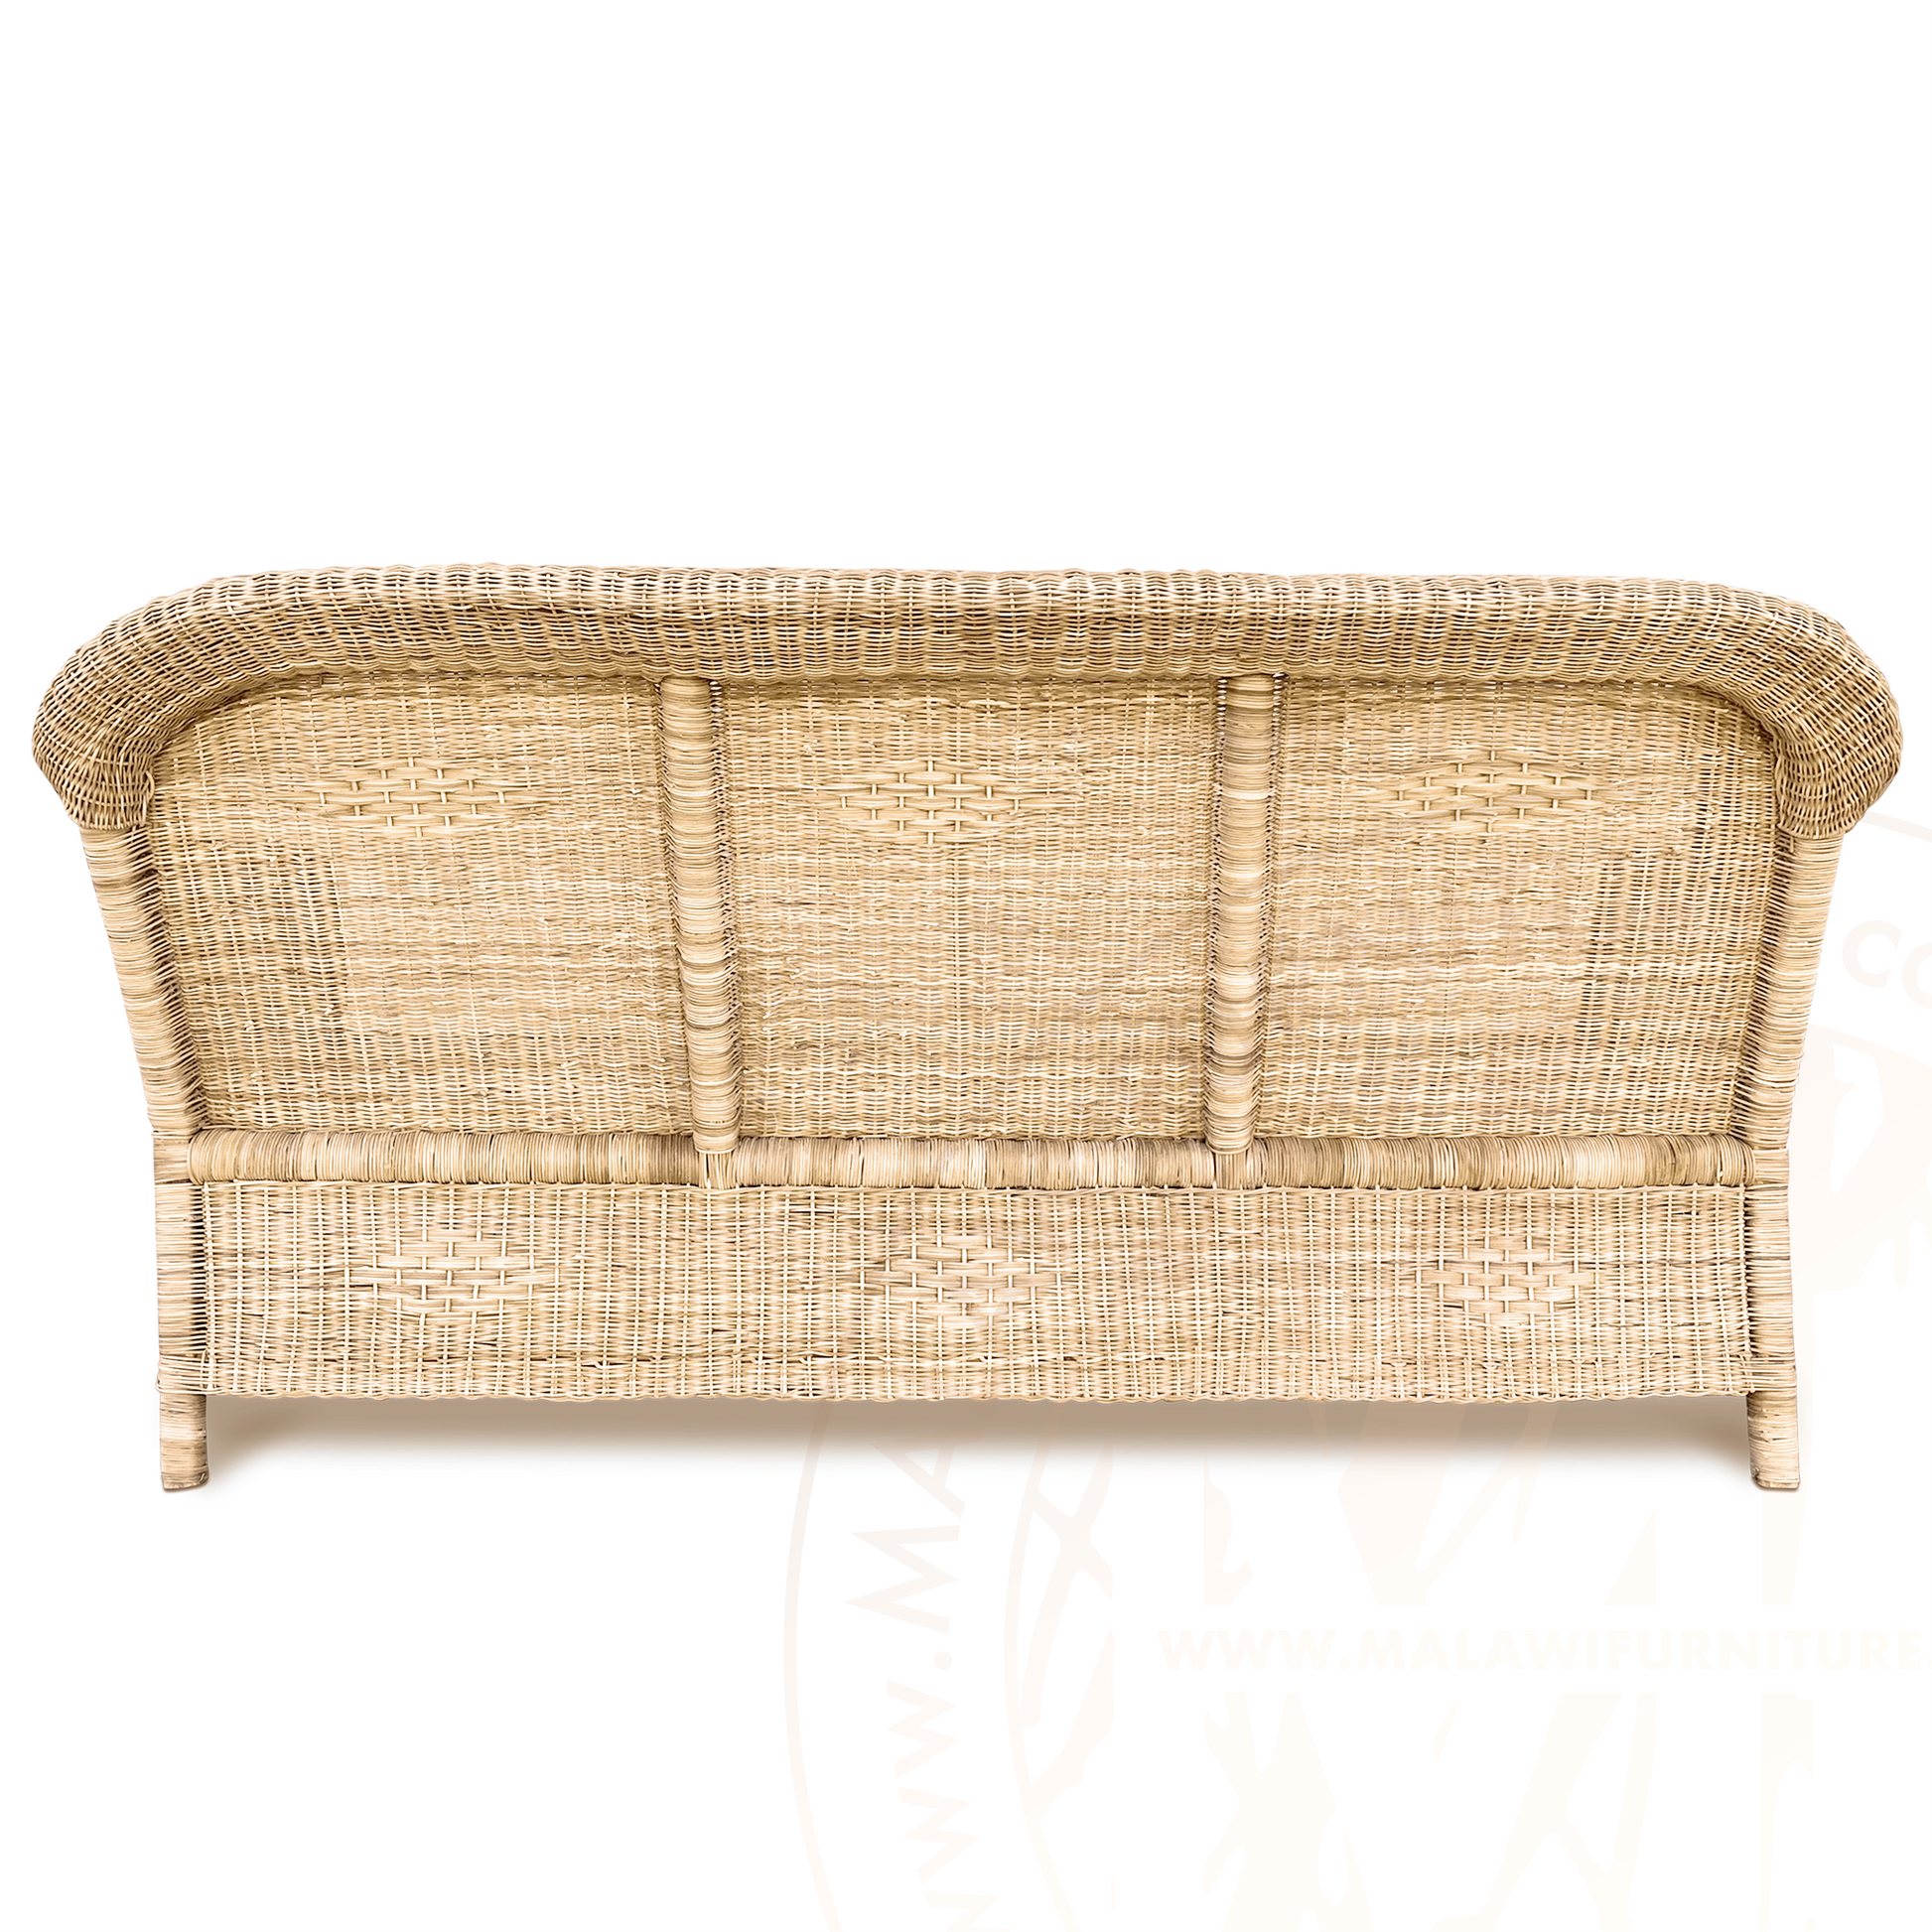 Classic Malawi Couch Set (Option 4)